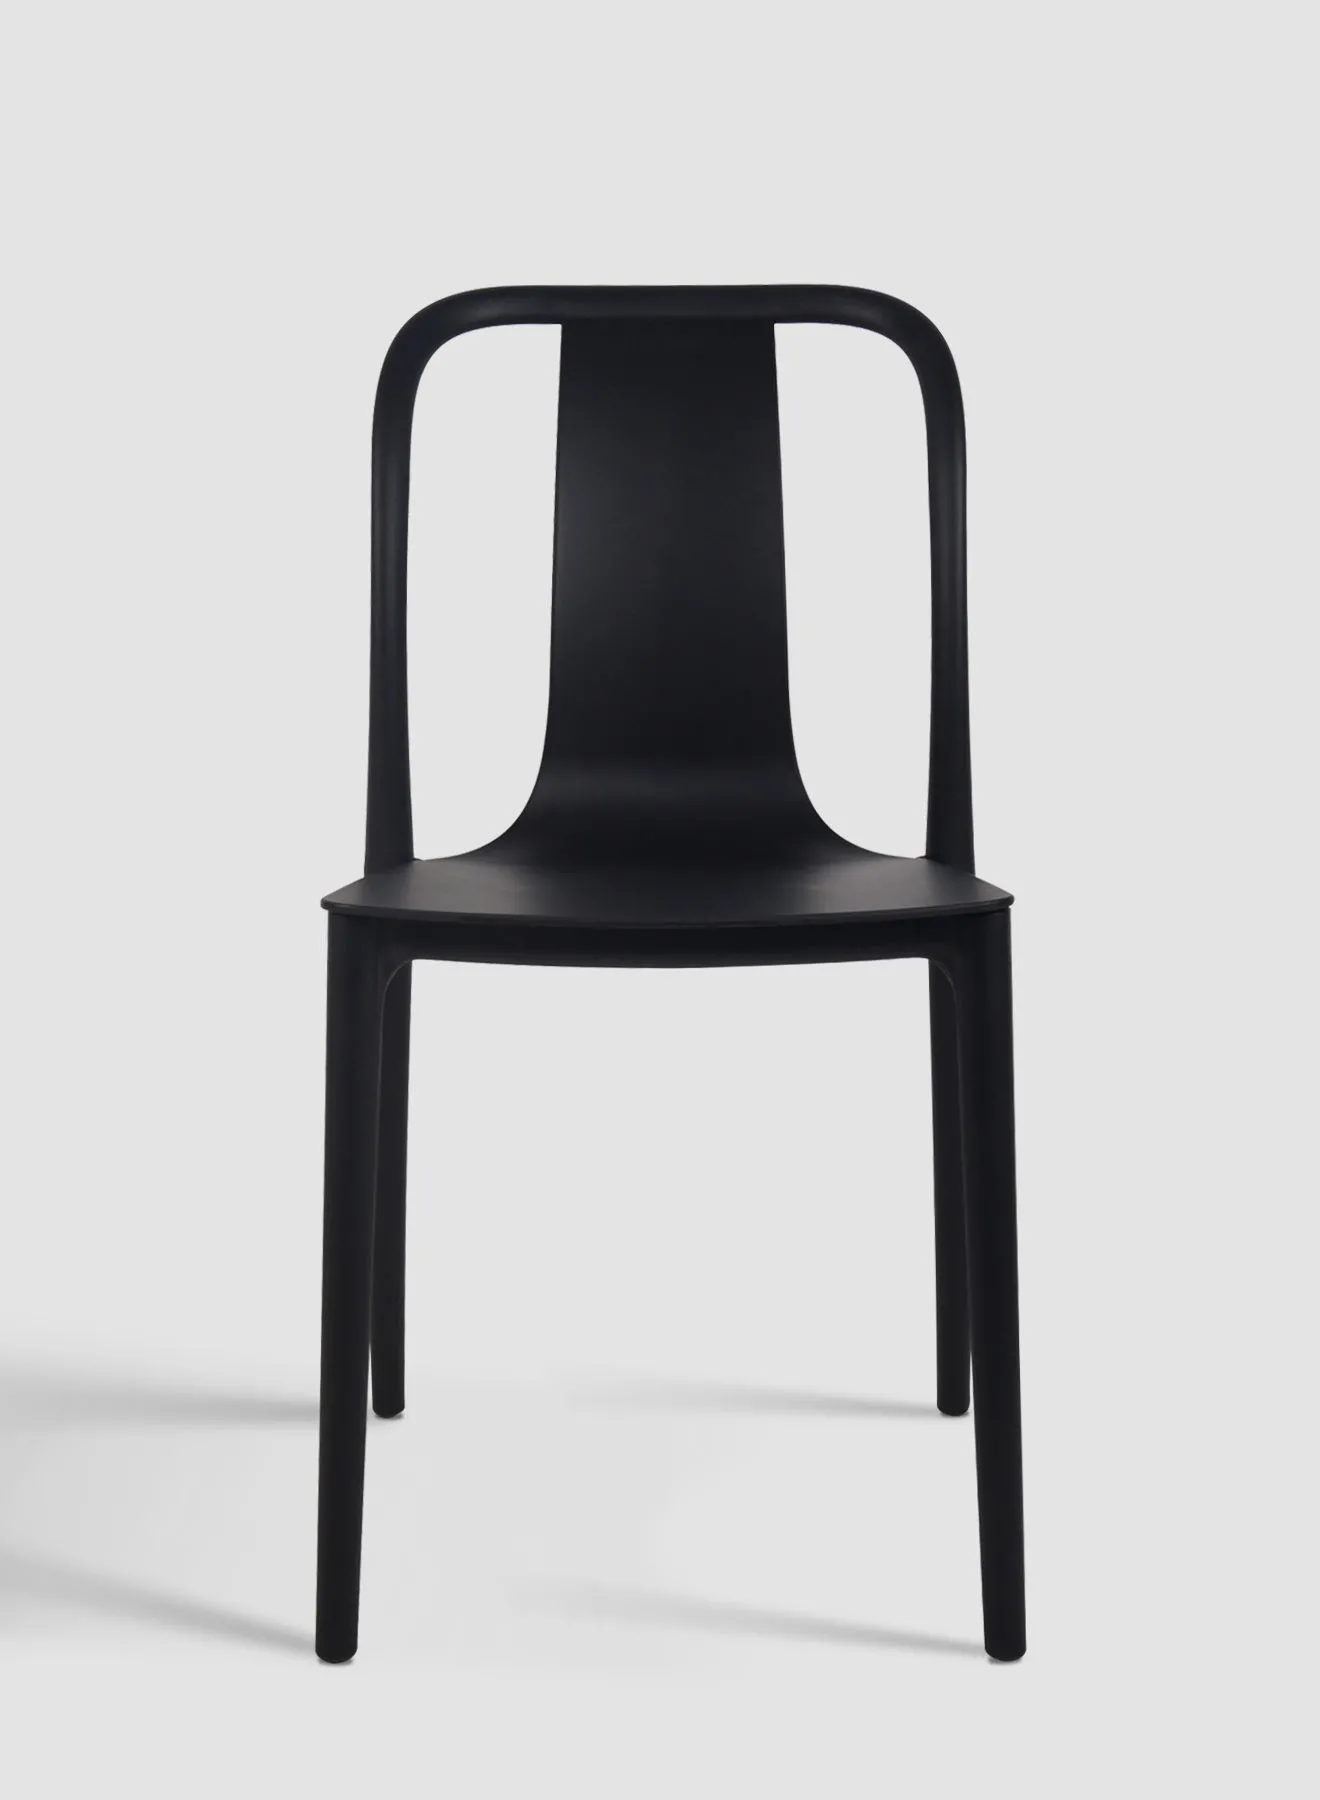 Switch Dining Chair In Black Plastic Chair Size 55 X 48 X 89